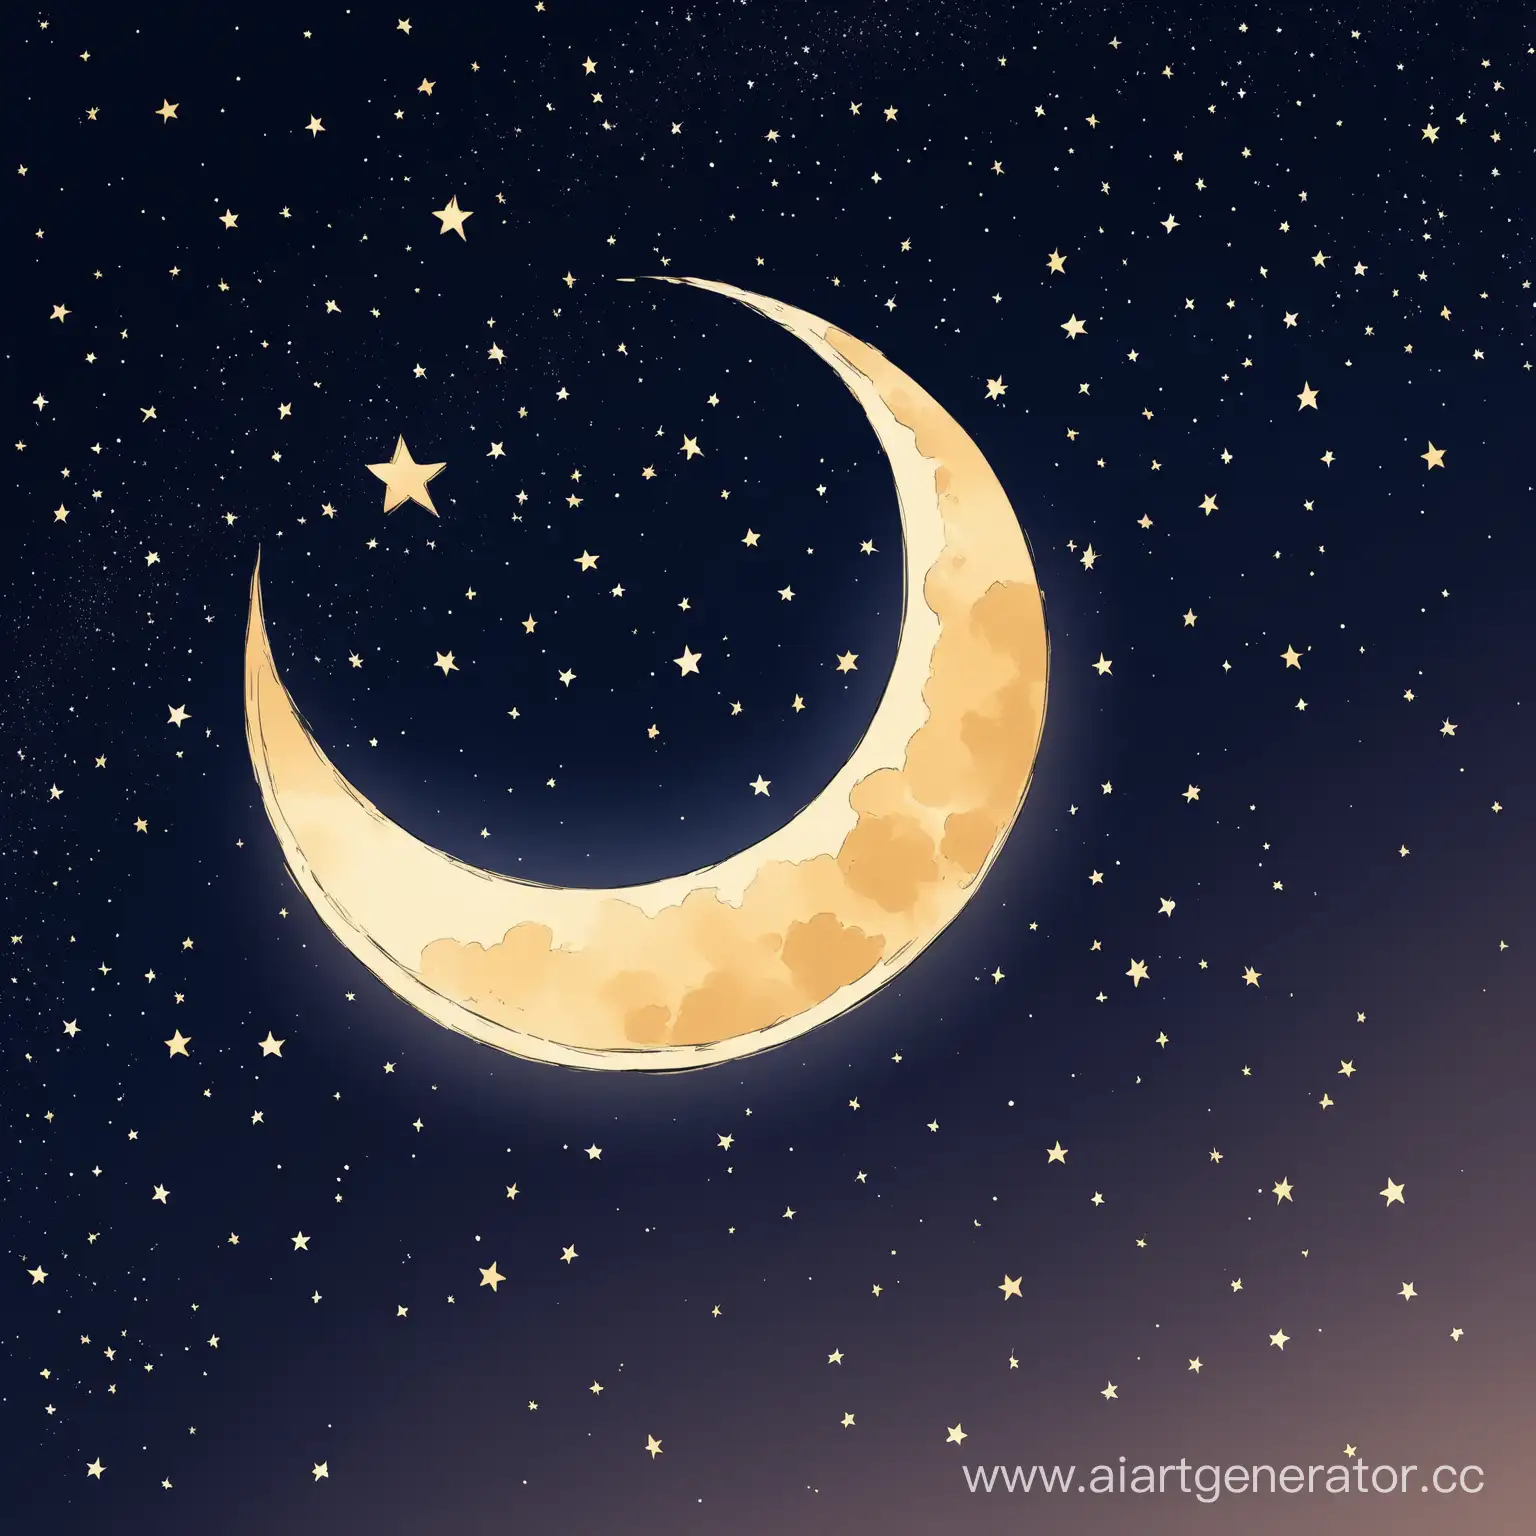 Starry-Night-Sky-with-Crescent-Moon